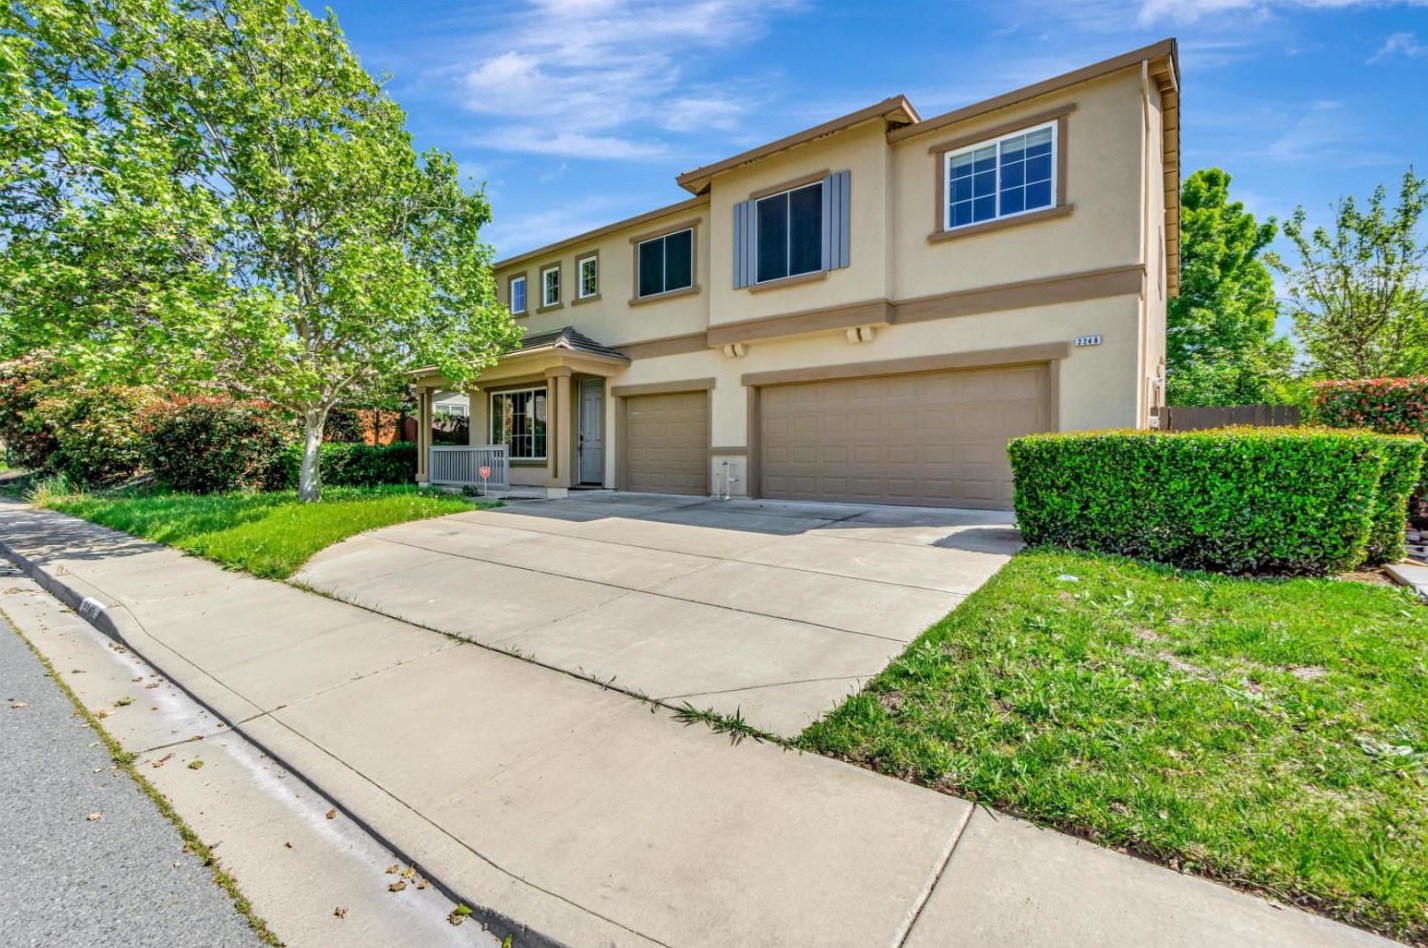 2248 Glen Canyon Dr, West Pittsburg, CA 94565